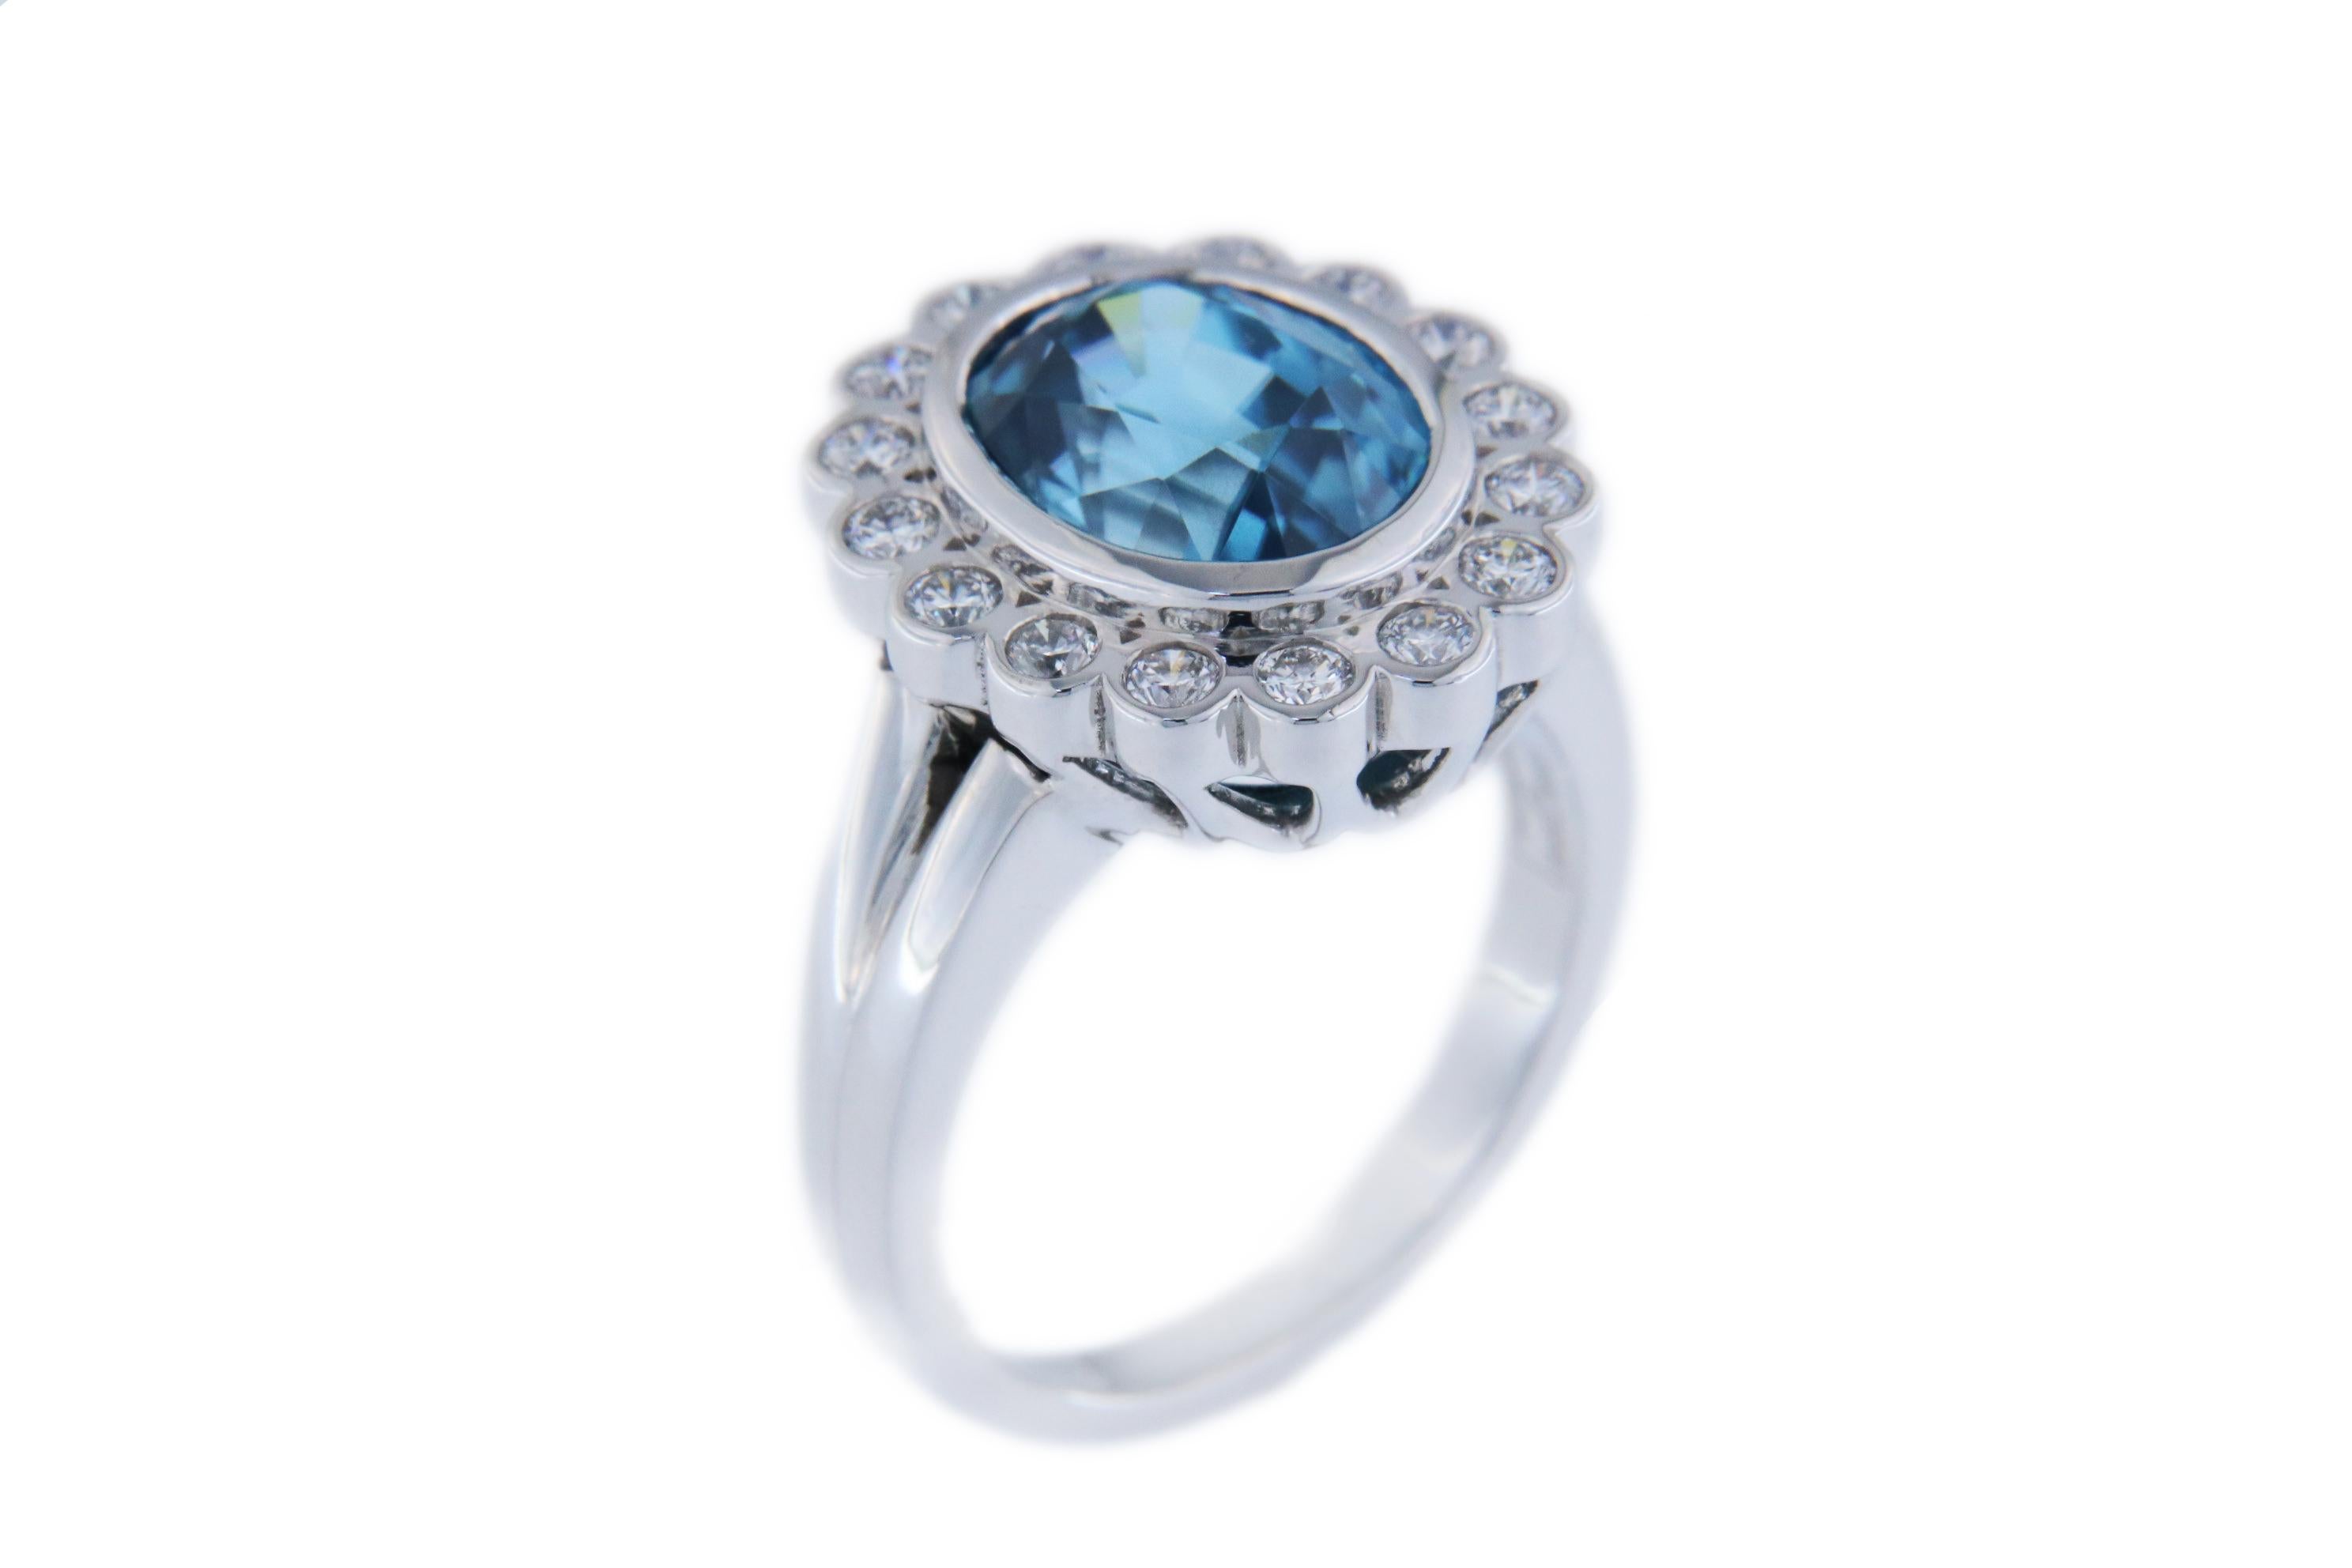 Orloff of Denmark's own; 
This captivating 6.171 carat Blue Zircon ring, set in high-quality Rhodium-Plated Sterling Silver, is a true statement of elegance. The centerpiece, a stunning Blue Zircon with a deep ocean hue, is complemented by sixteen